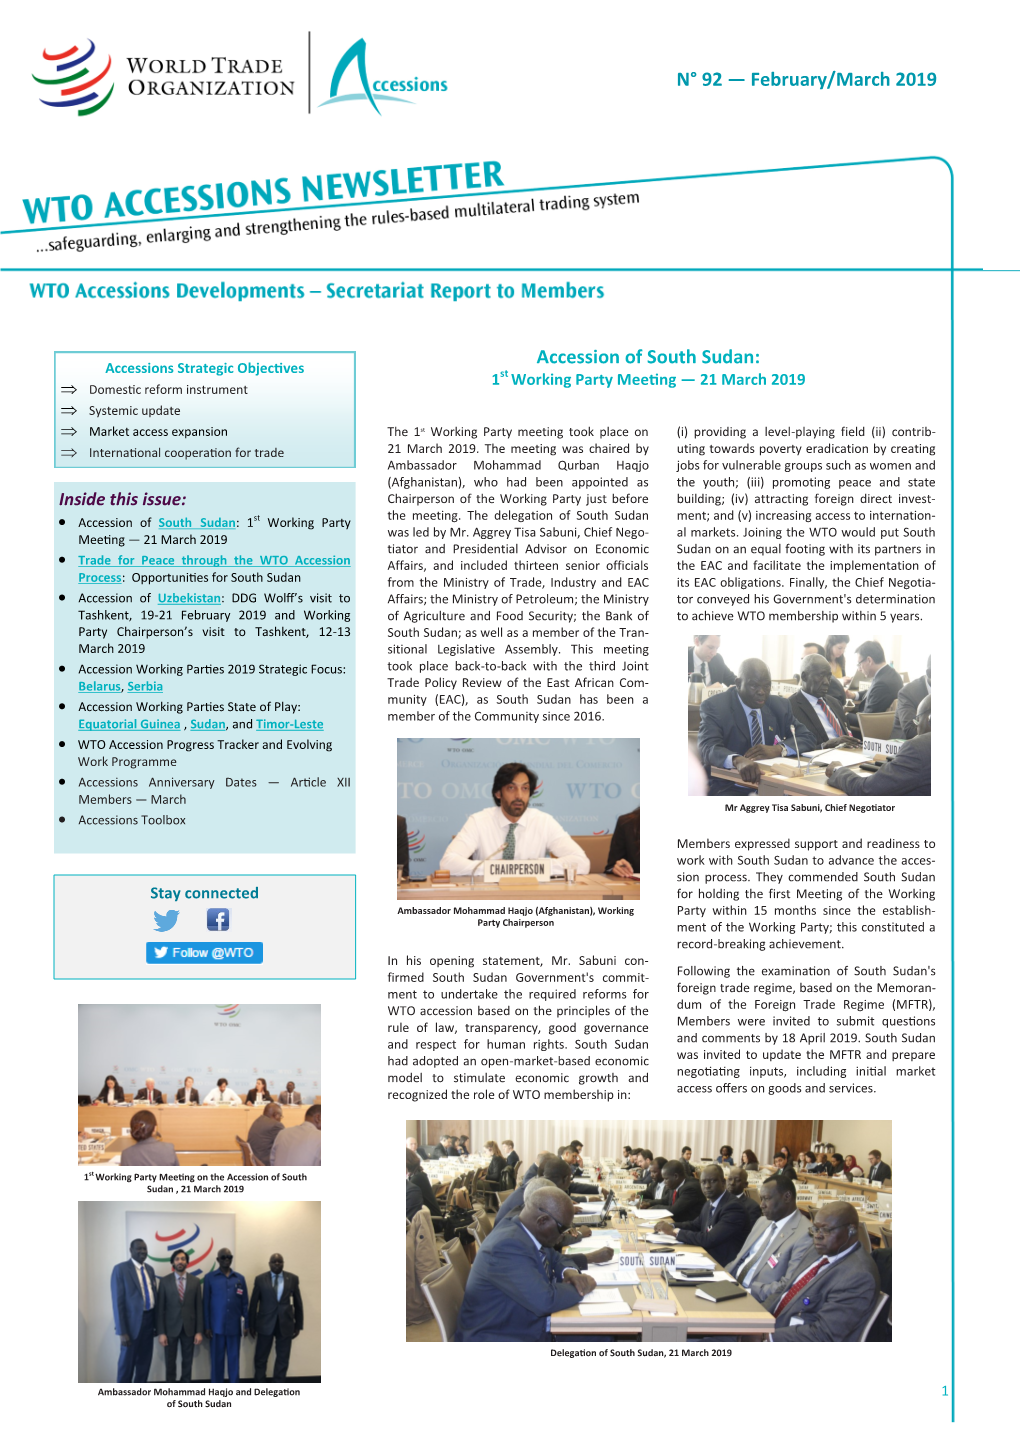 February/March 2019 Accession of South Sudan